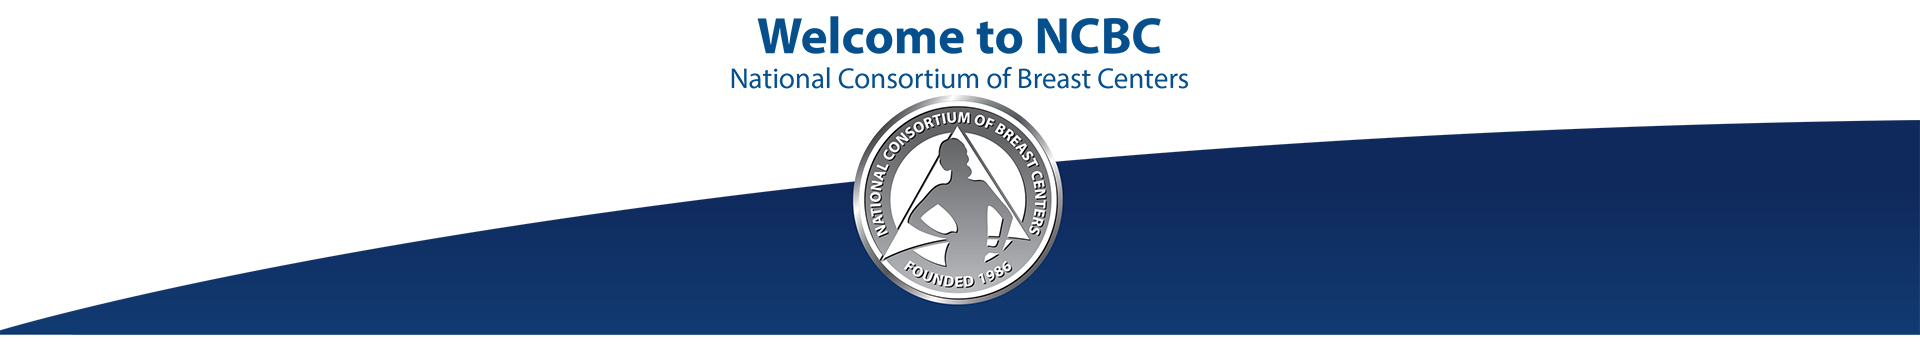 Welcome to NCBC